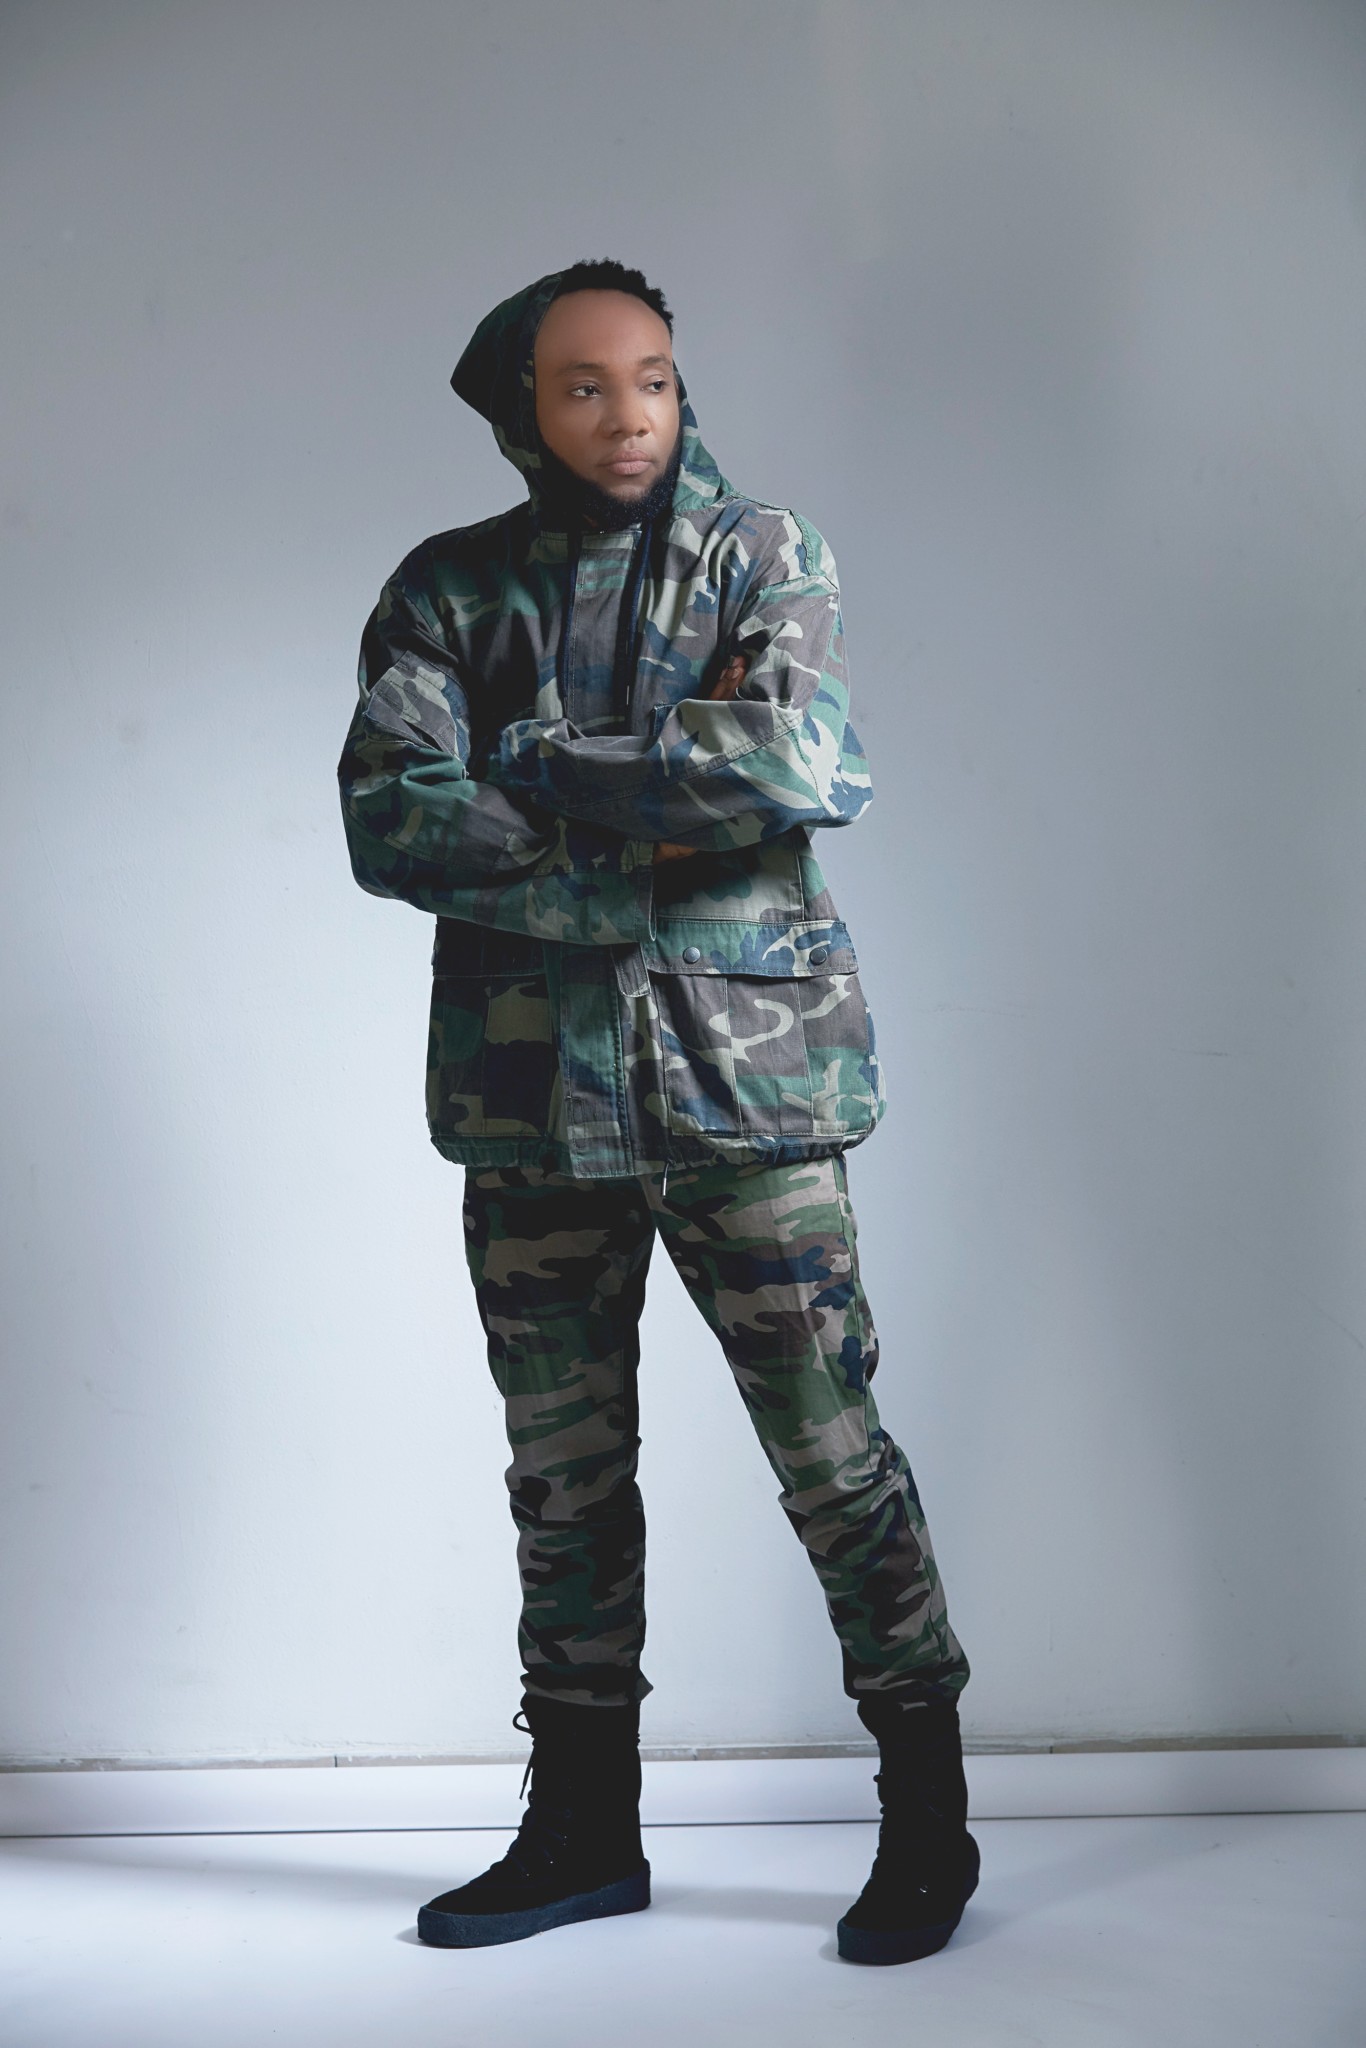 BellaNaija - Five Star General! Different sides to Kcee in New Photos